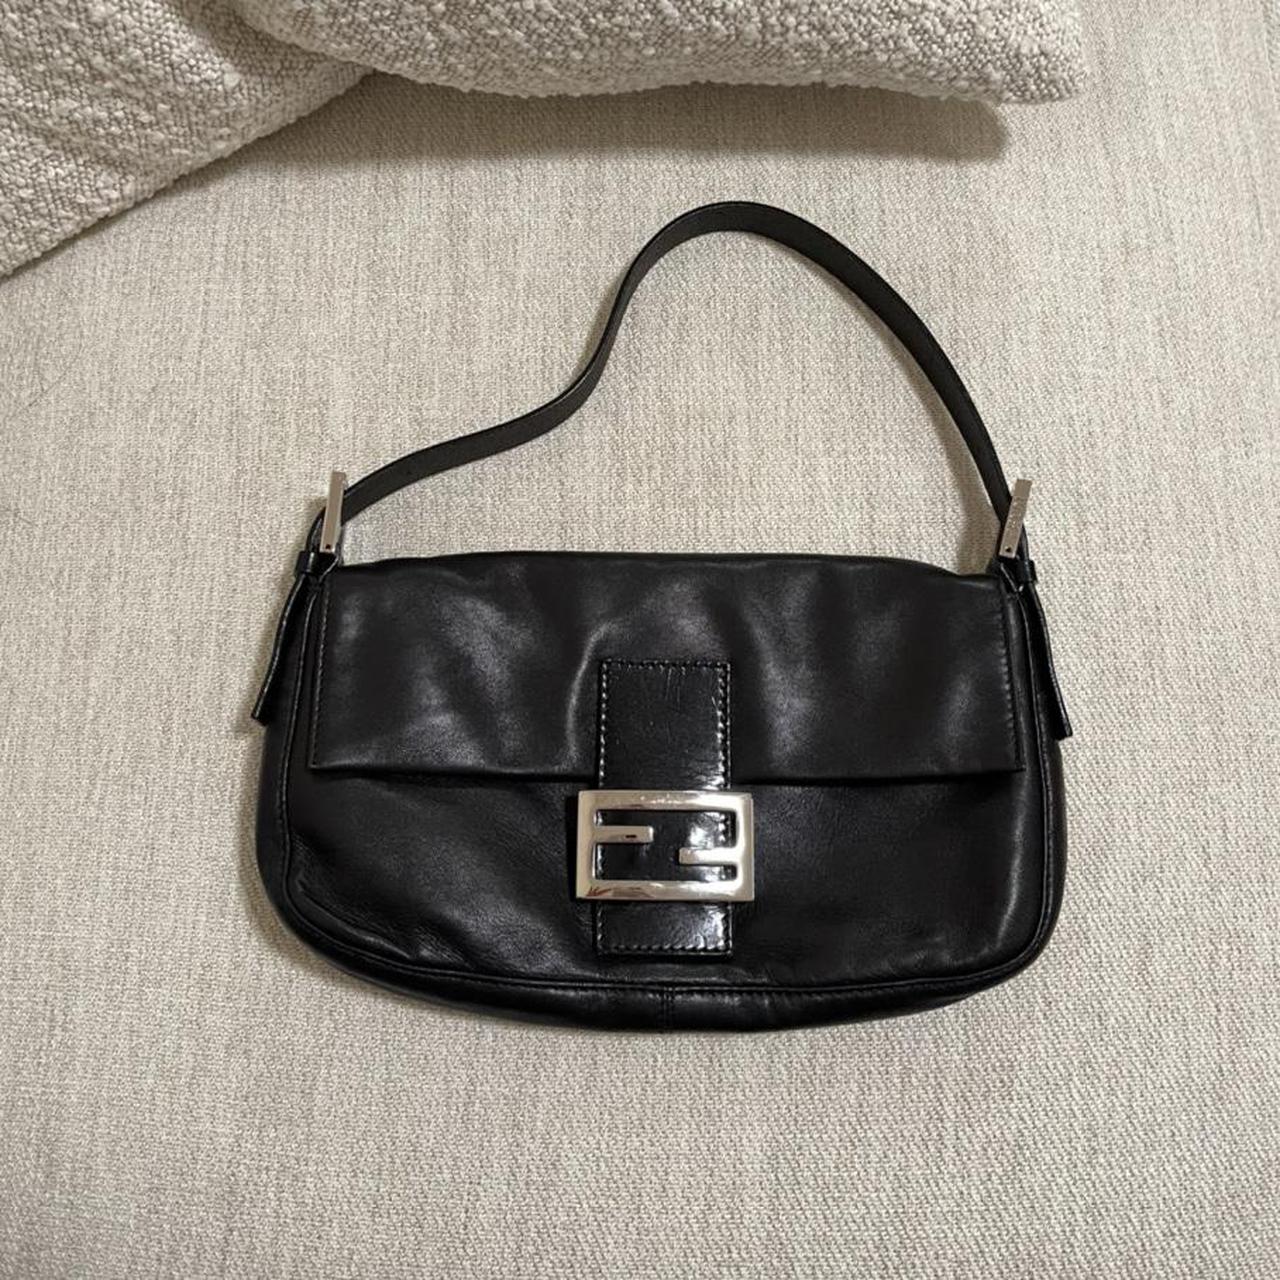 Fendissime - Authenticated Handbag - Leather Black Plain for Women, Very Good Condition